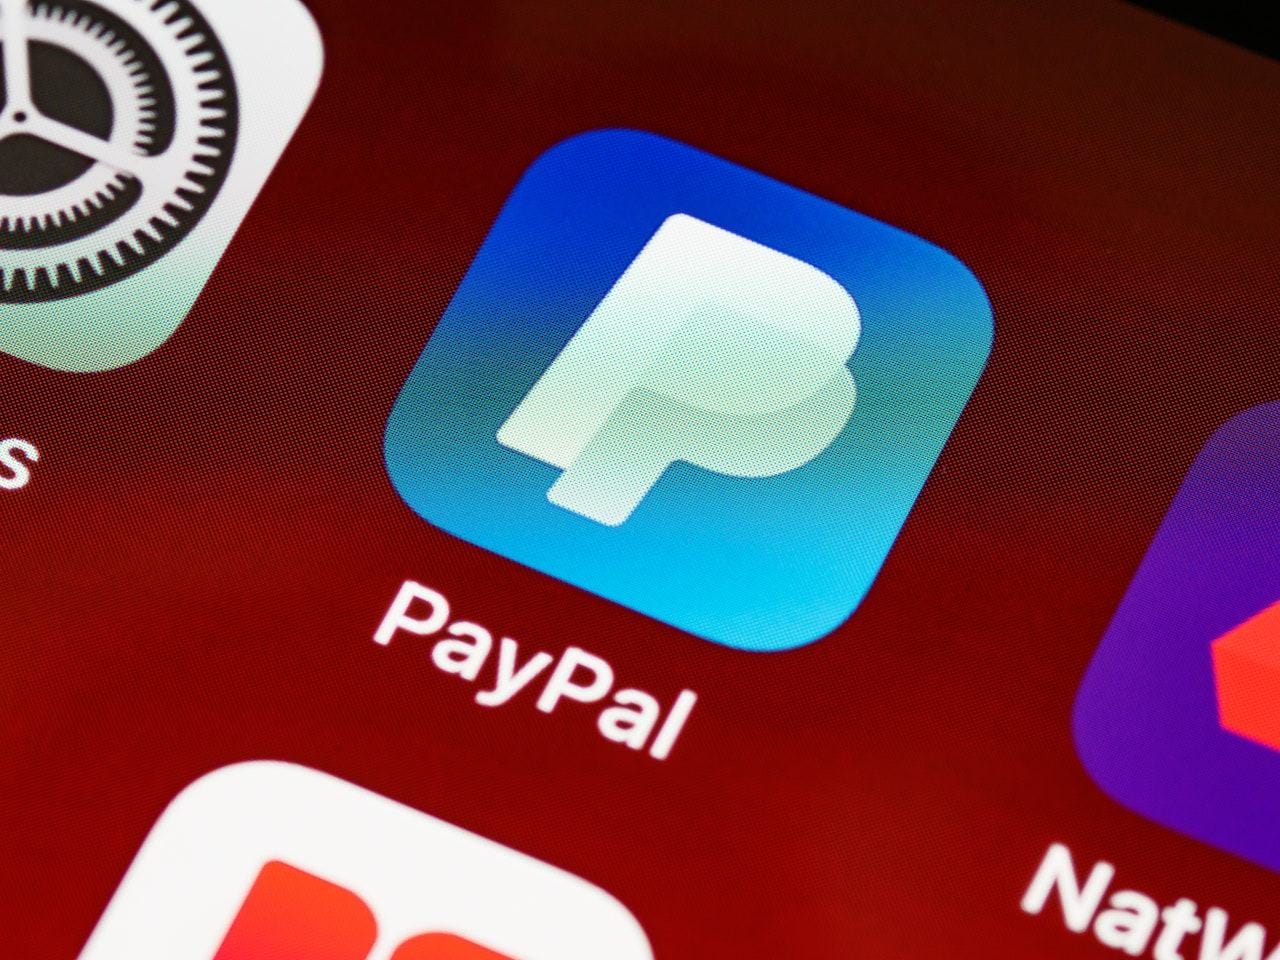 4 Things You Probably Didn't Know The PayPal App Can Do